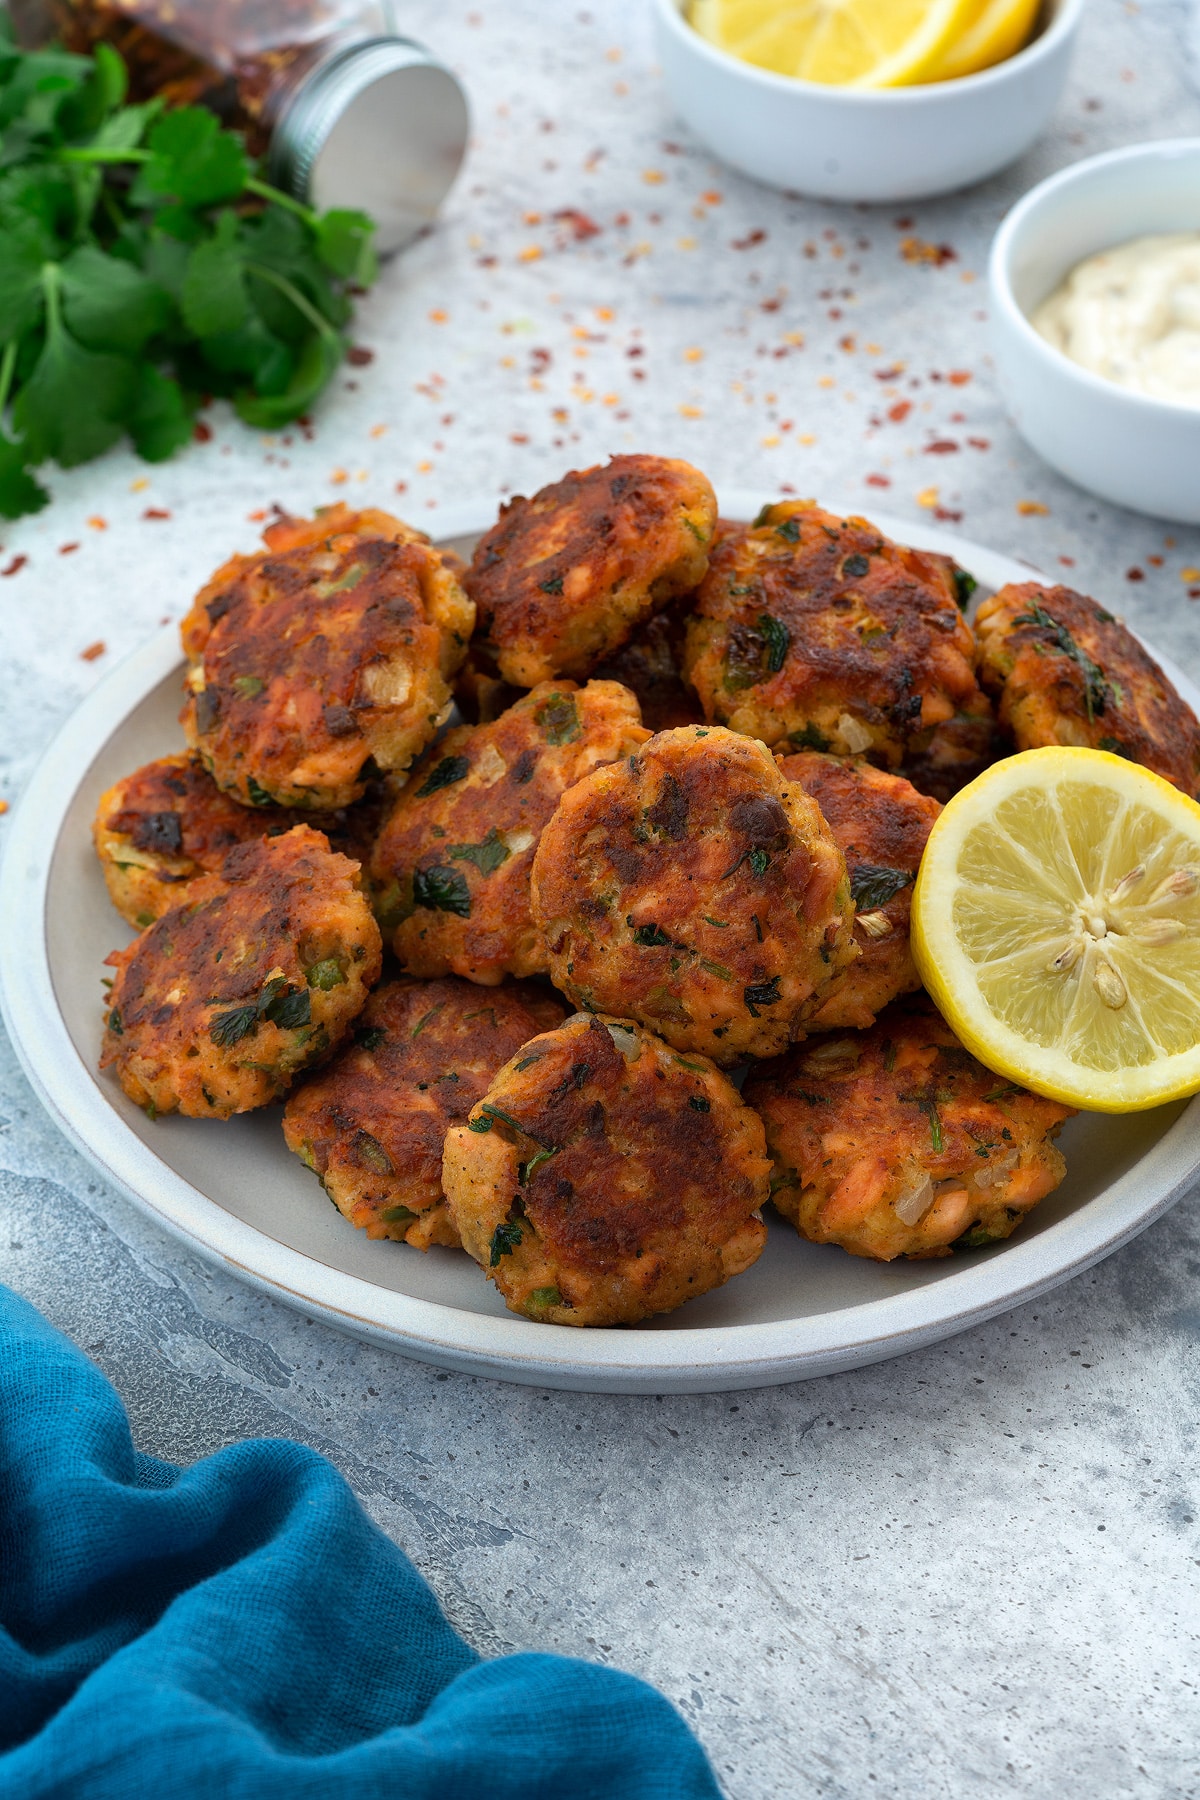 Salmon Patties(cakes) served in a white plate with lemon slice and few ingredients scattered around.